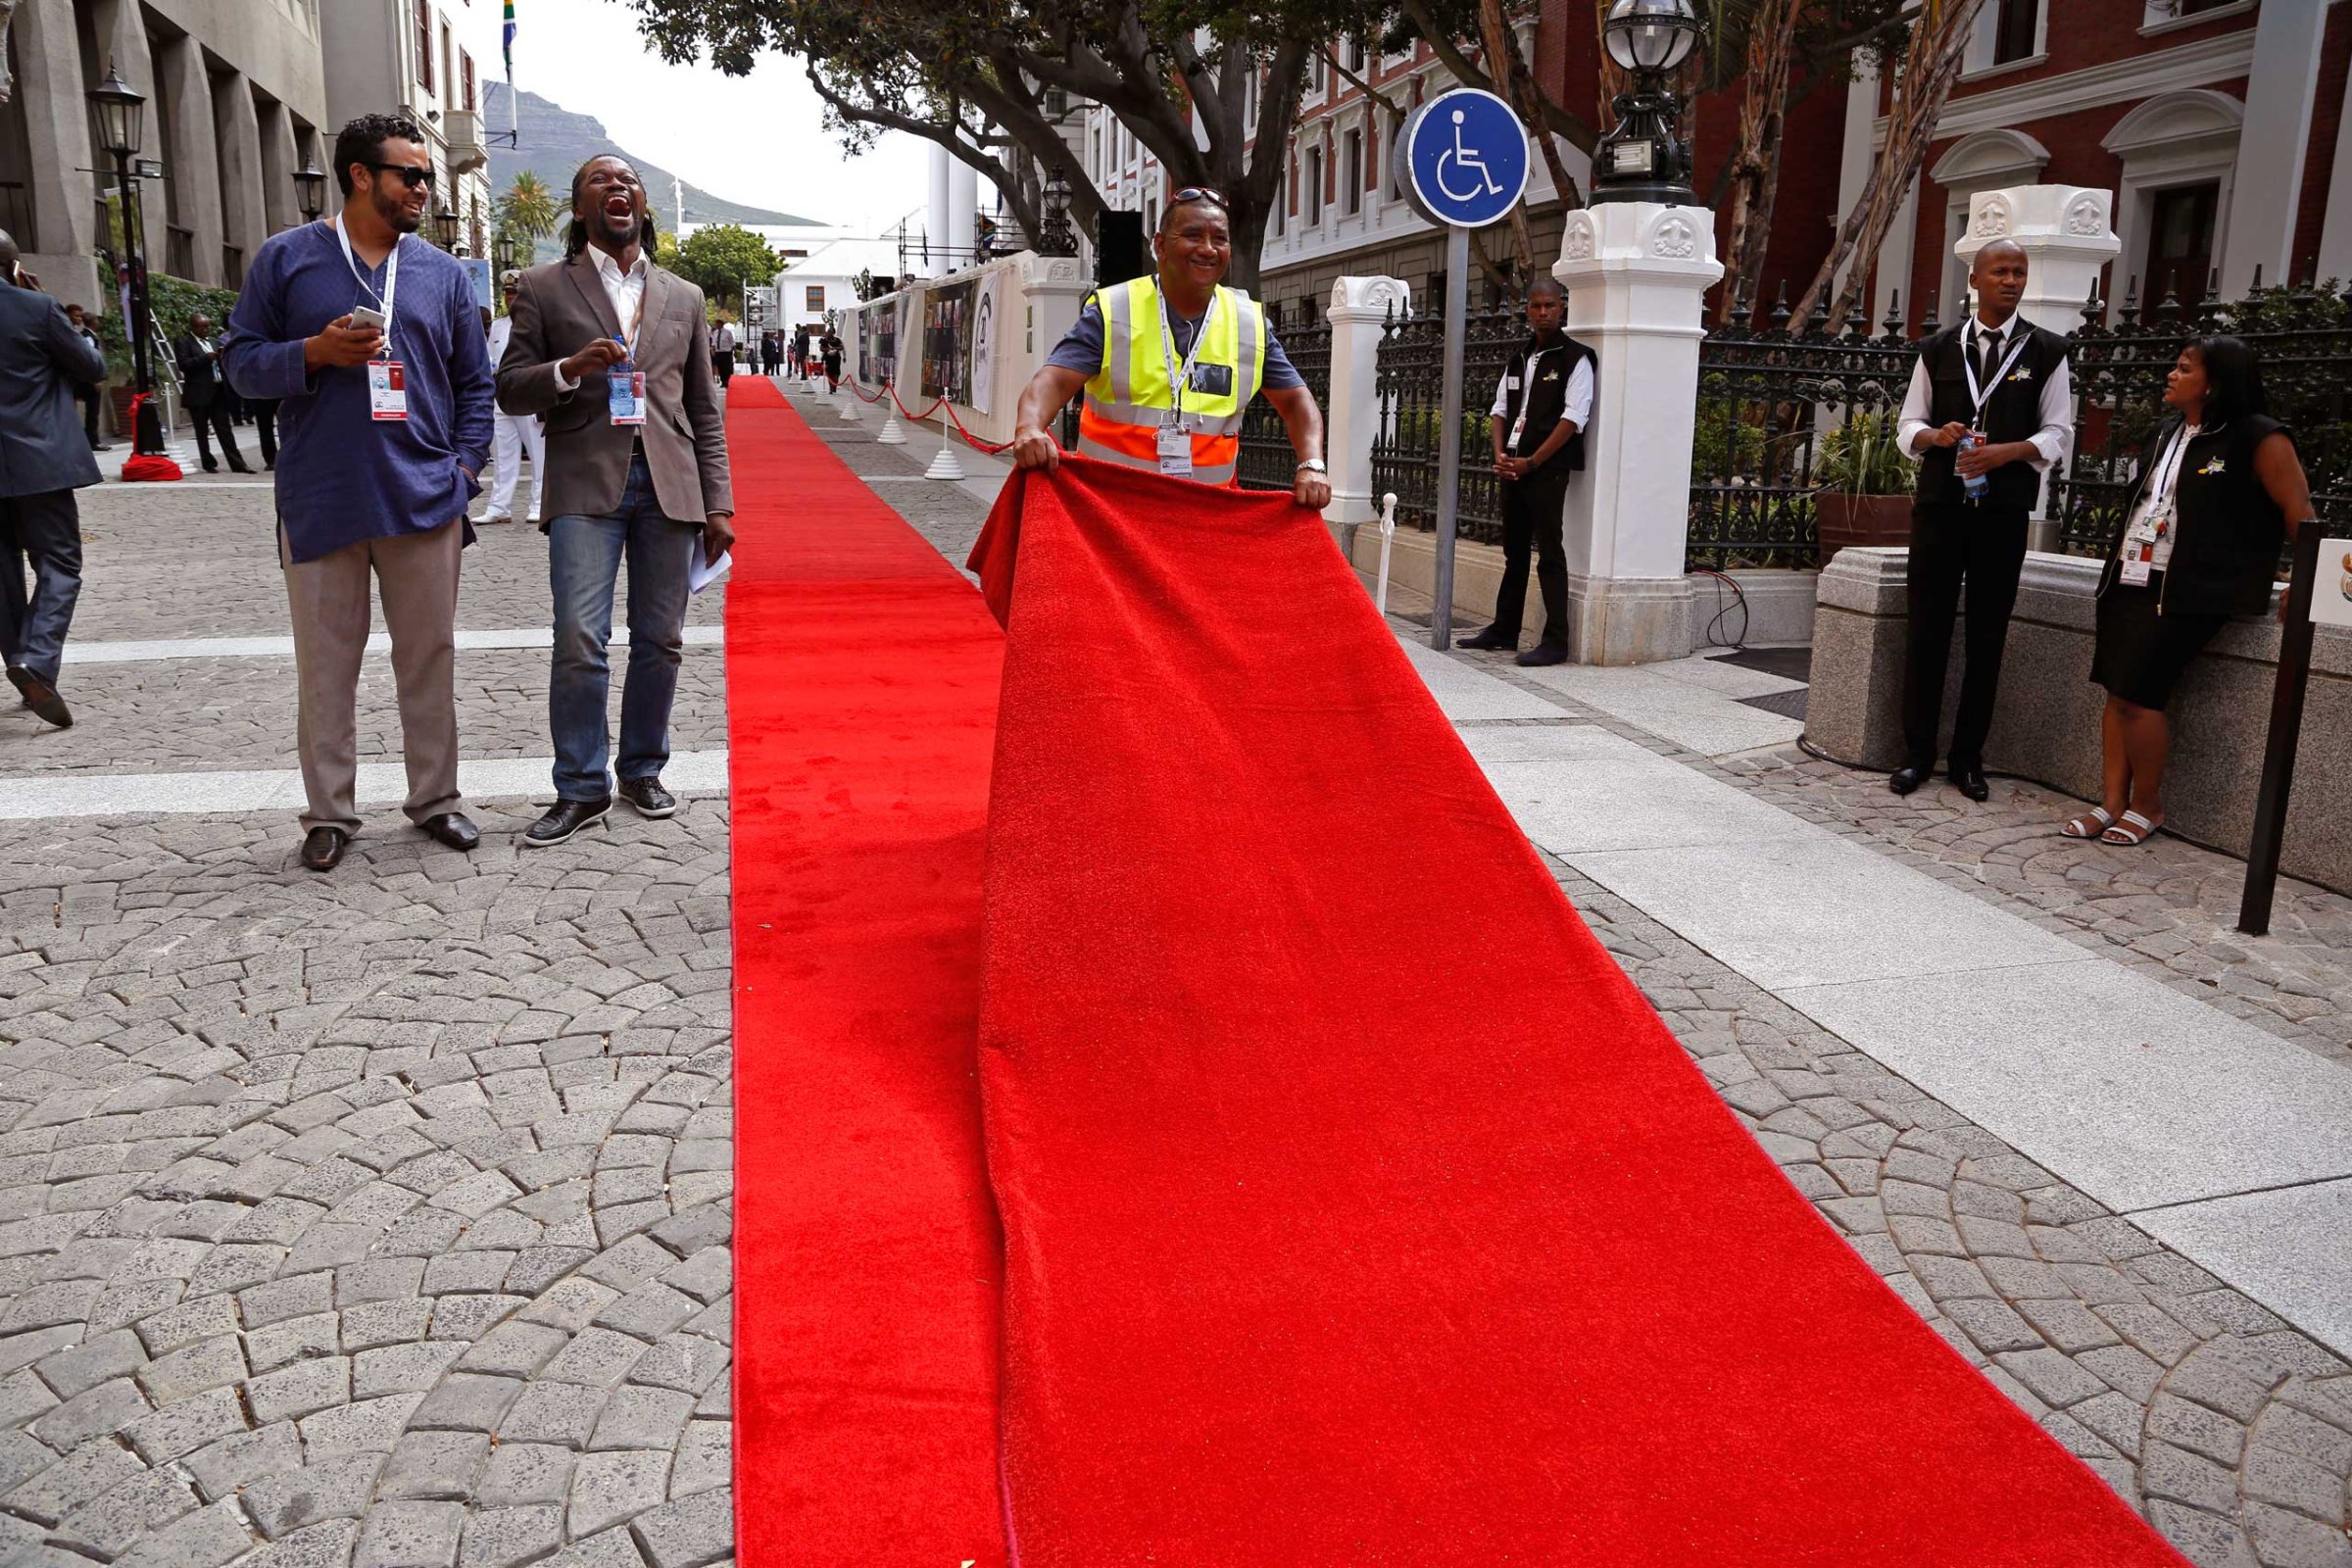 The red carpet is laid out at Parliament before the start of the official opening session in Cape Town, South Africa, Feb. 12, 2015.